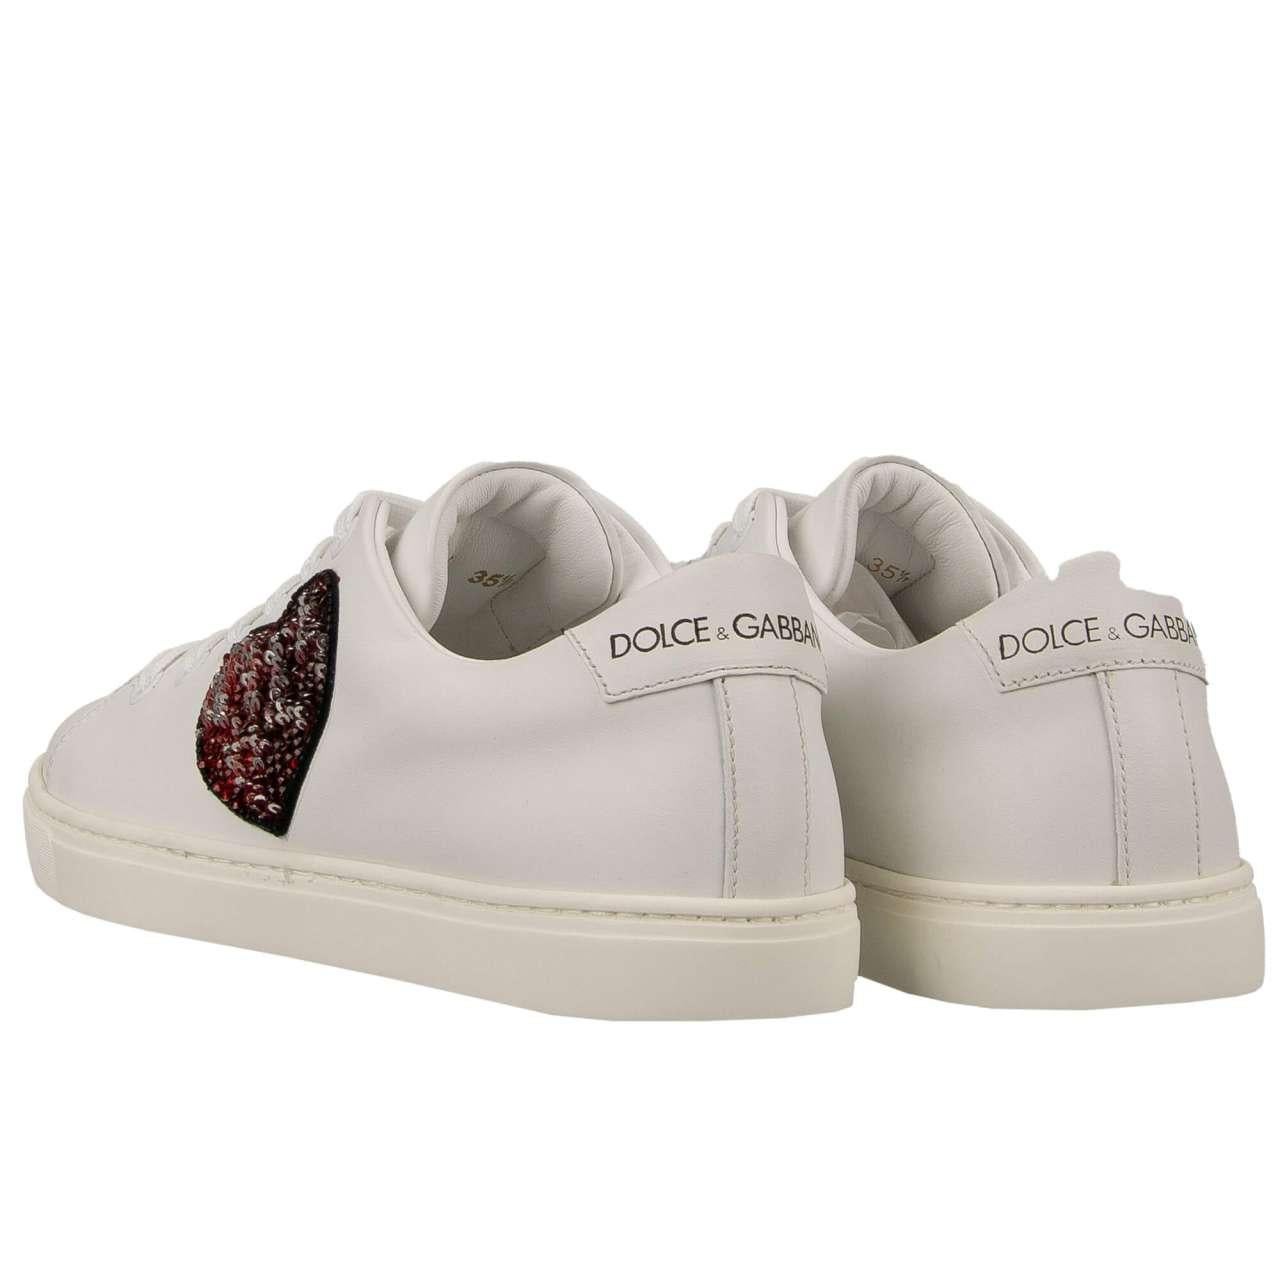 Dolce & Gabbana - Crystal Heart Love Patch Sneaker LONDON White EUR 37 In Excellent Condition For Sale In Erkrath, DE